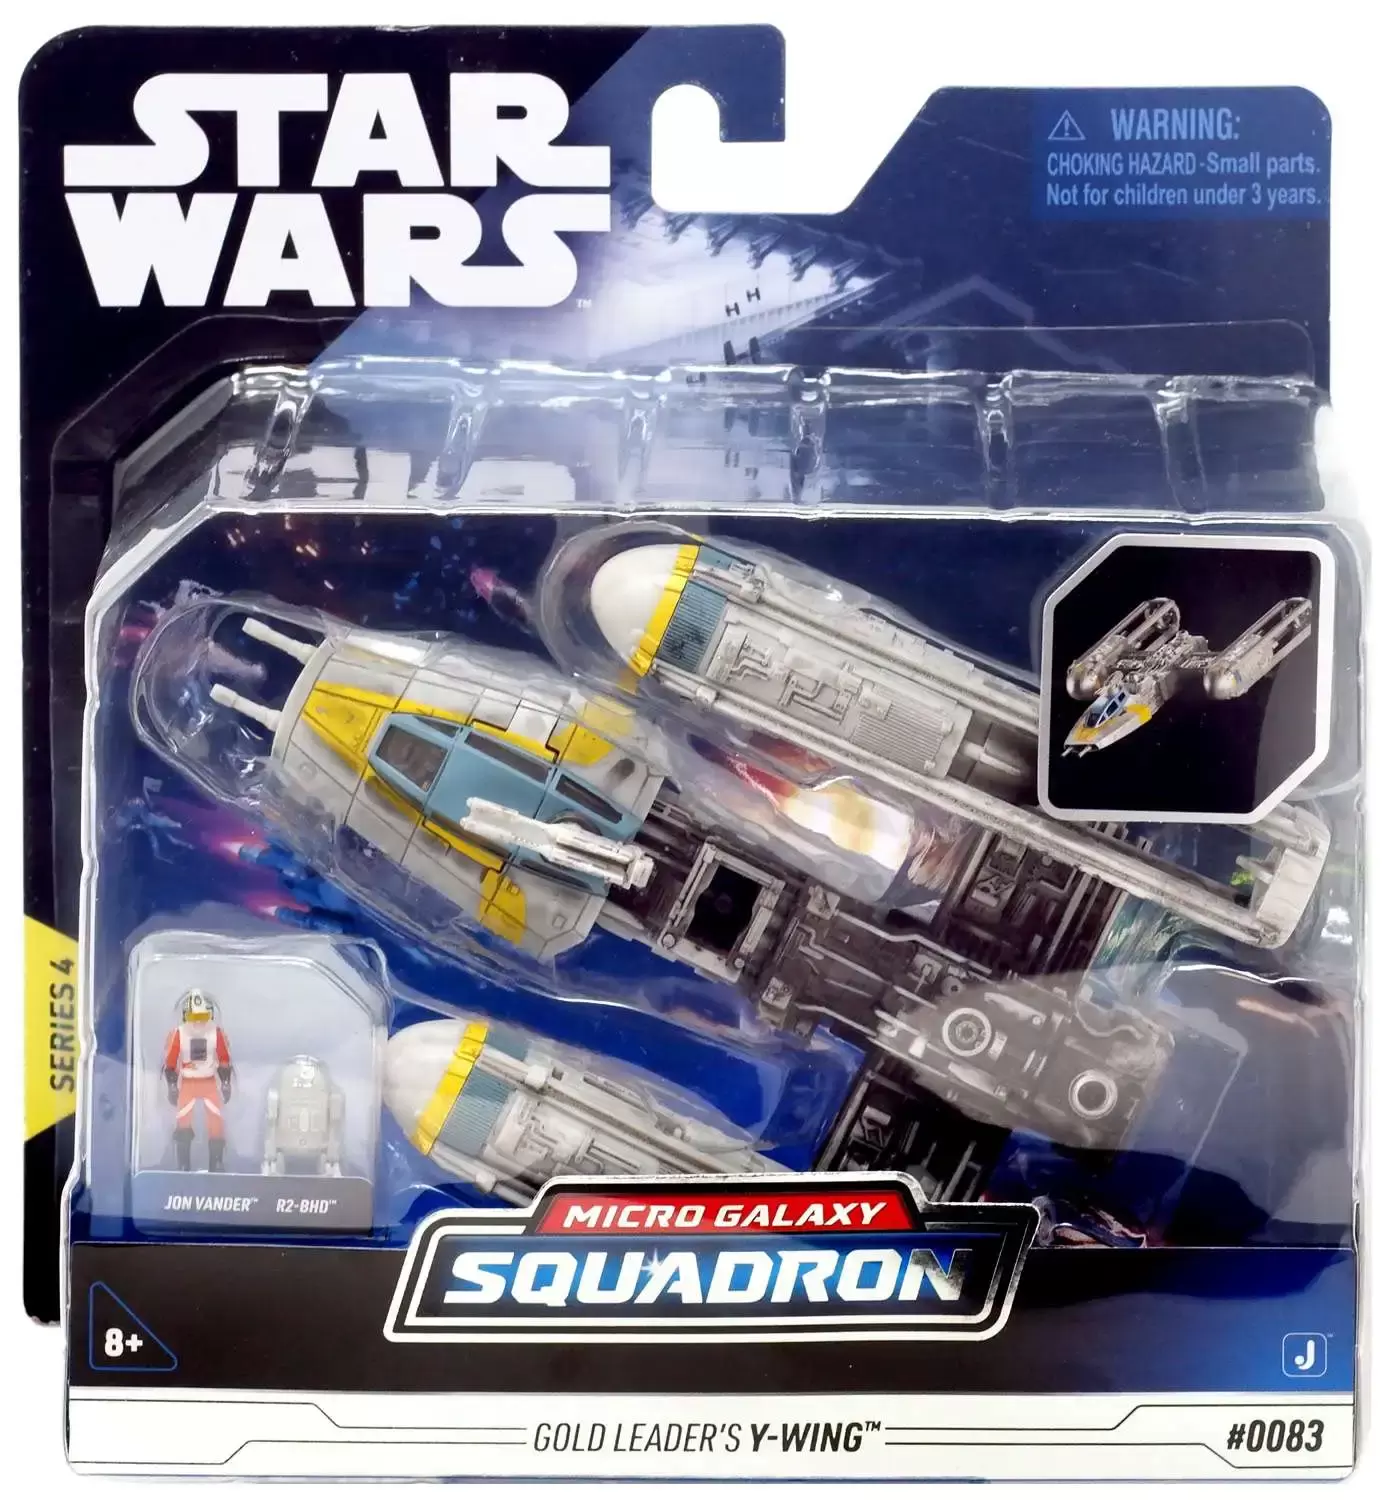 Micro Galaxy Squadron - Gold Leader\'s Y-wing With Jon Vander & R2-BHD